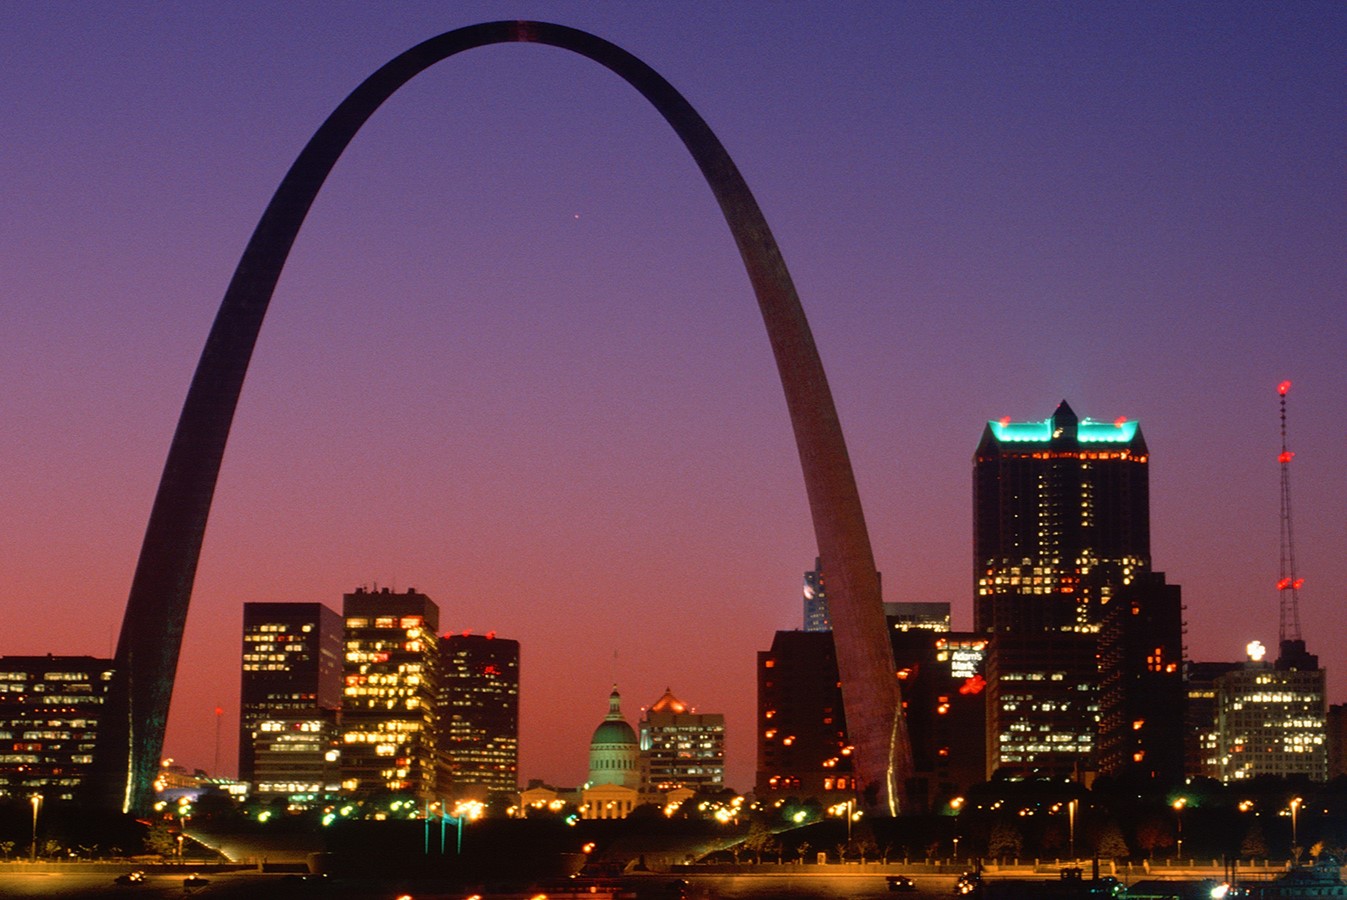 19-st-louis-arch-fun-facts